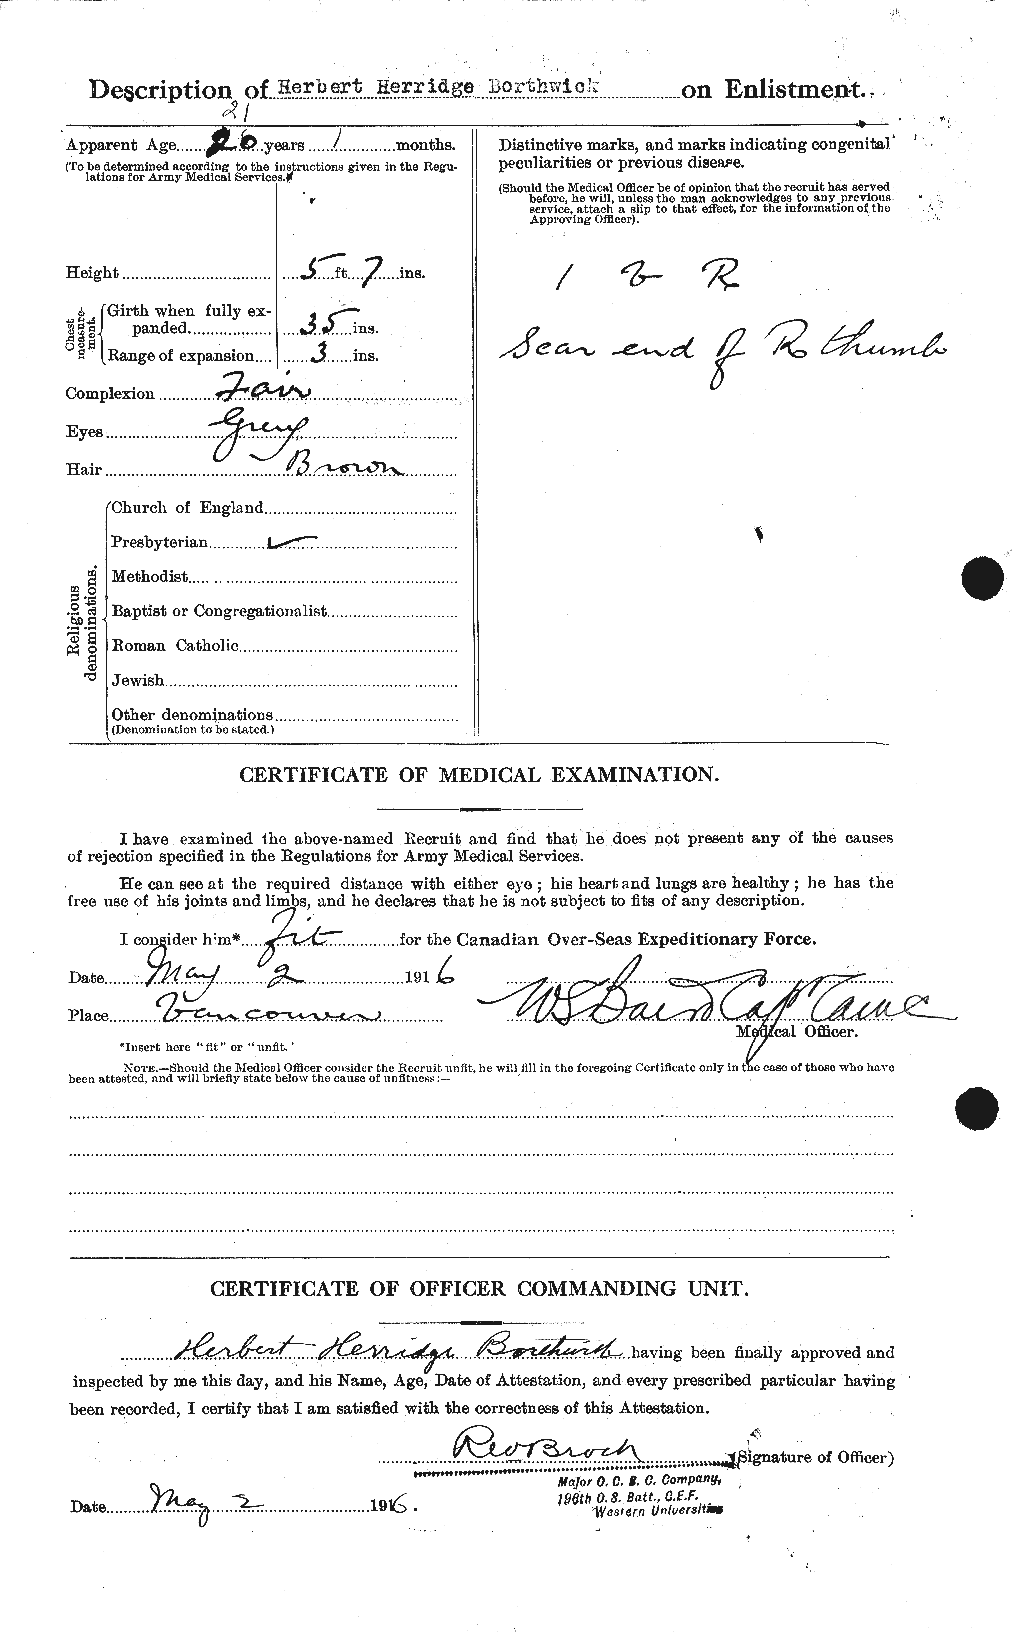 Personnel Records of the First World War - CEF 253497b